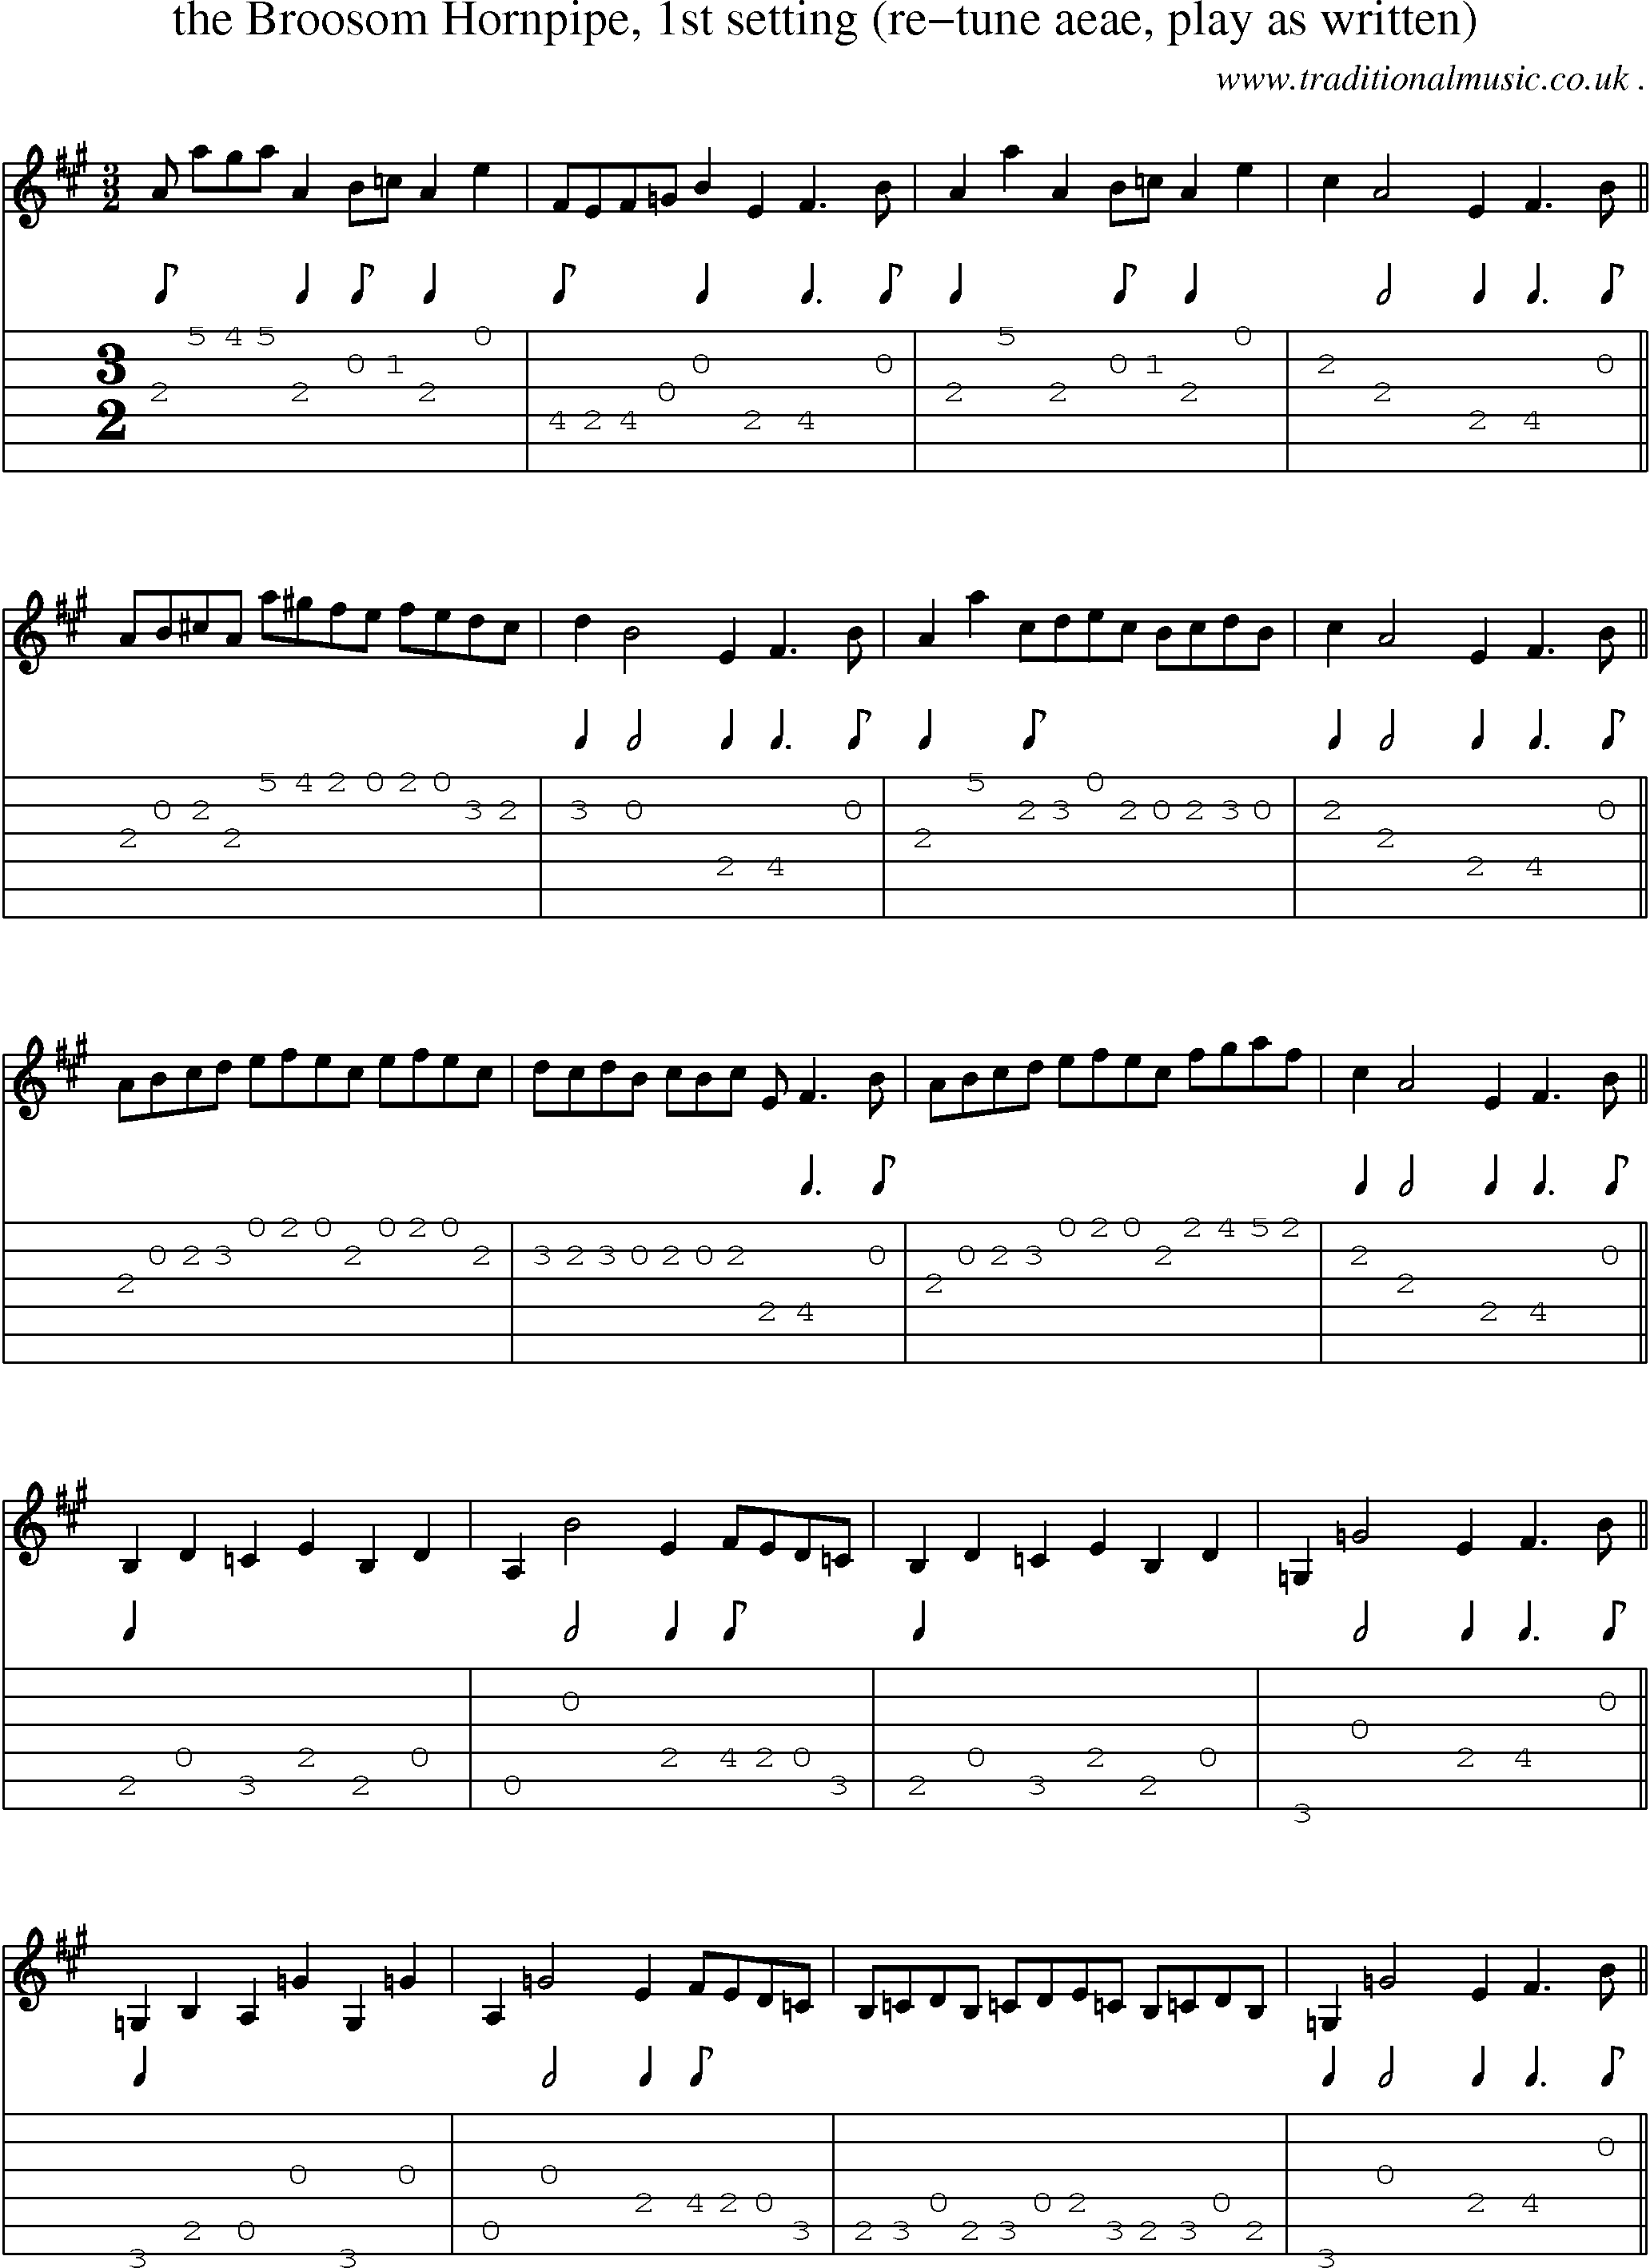 Sheet-Music and Guitar Tabs for The Broosom Hornpipe 1st Setting (re-tune Aeae Play As Written)